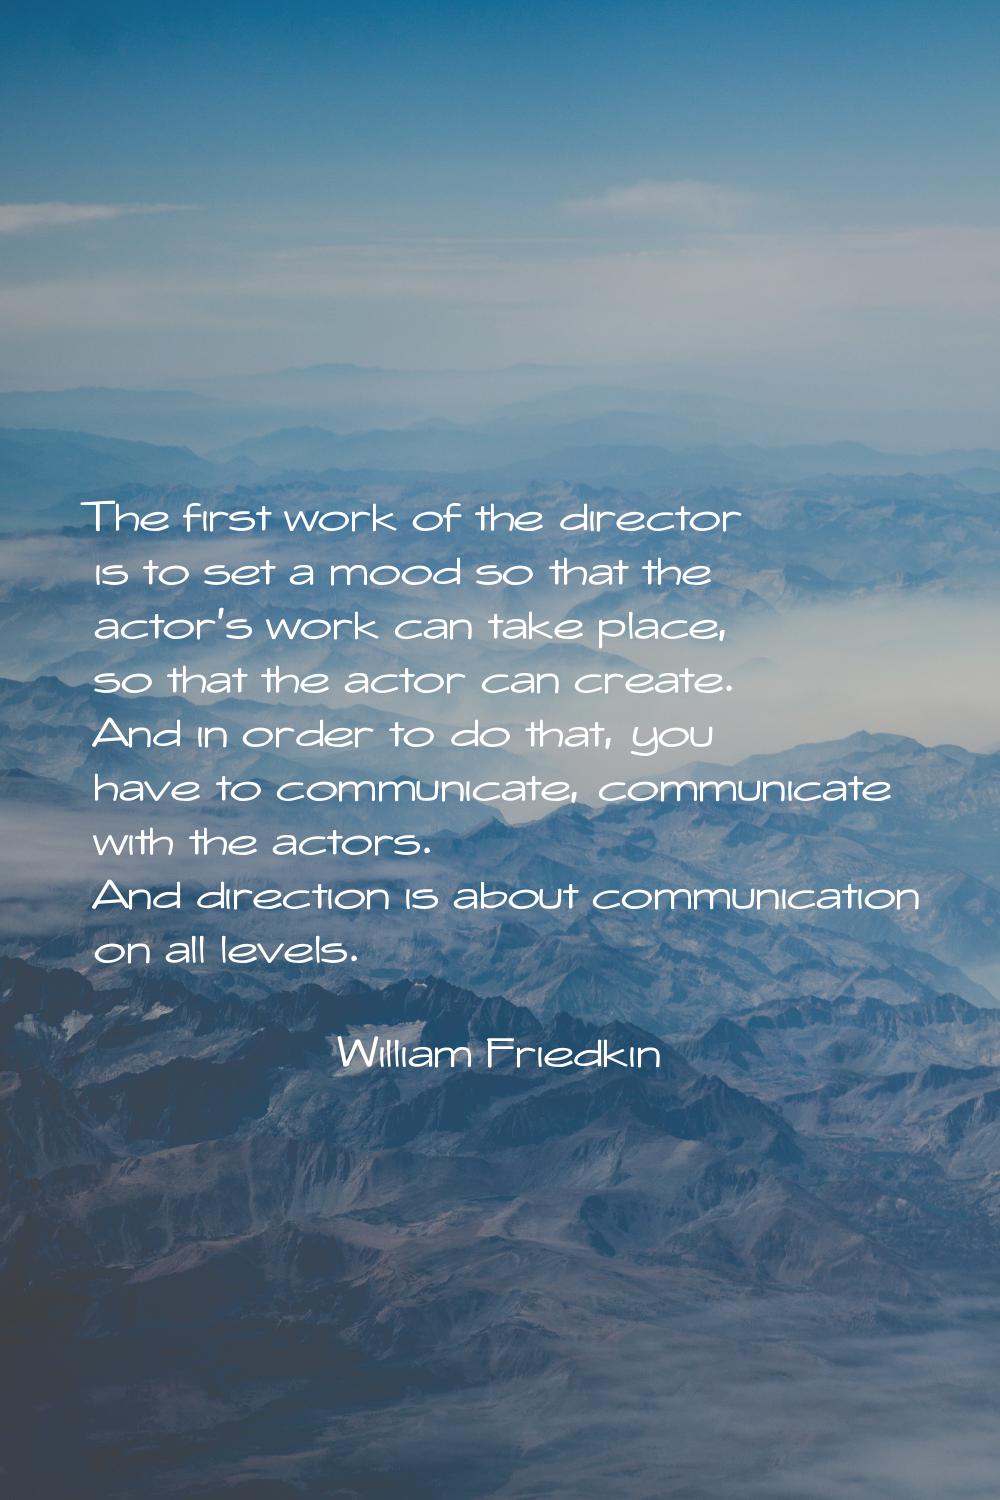 The first work of the director is to set a mood so that the actor's work can take place, so that th